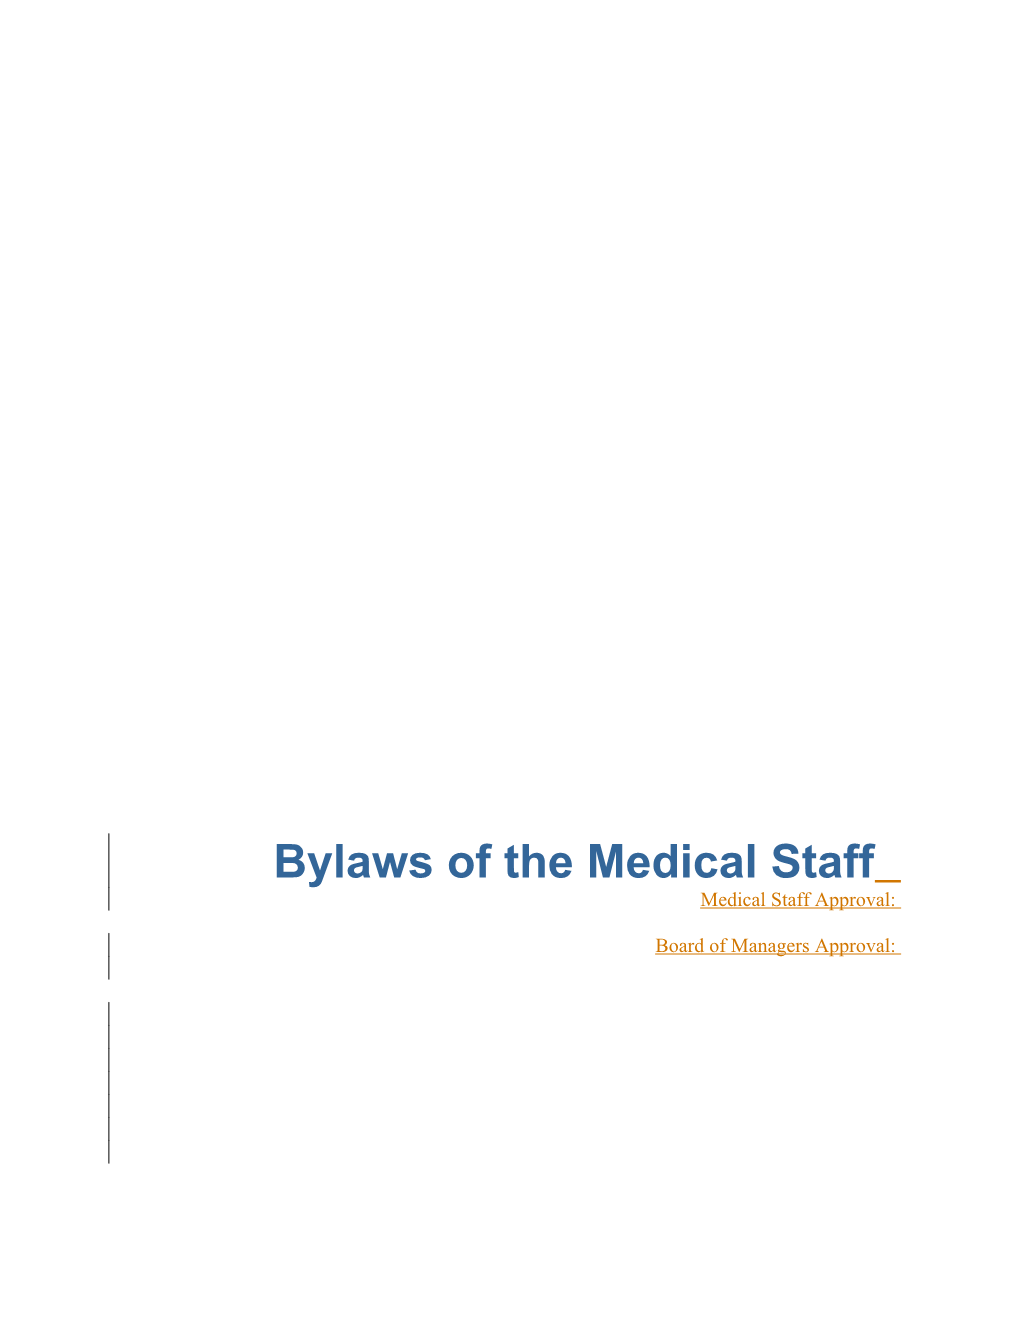 Bylaws of the Medical Staff